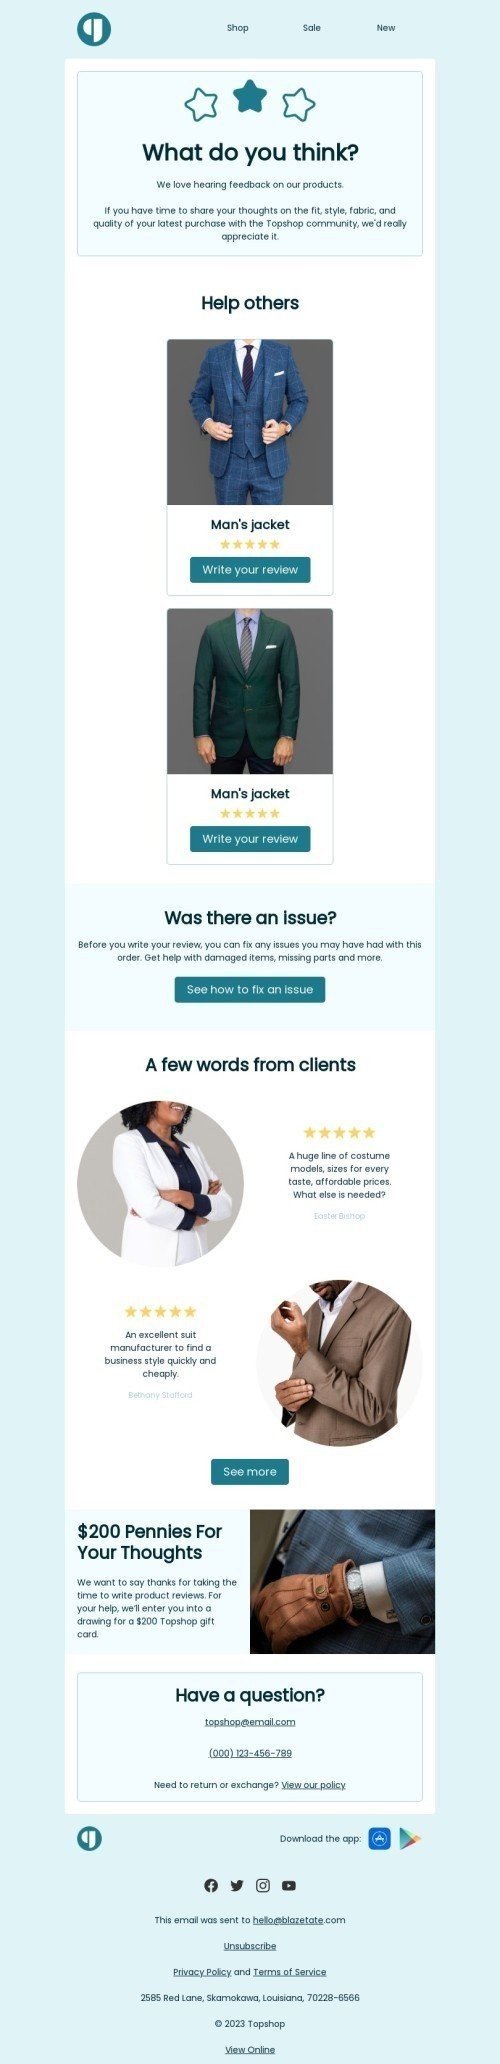 Survey & feedback email template "What do you think?" for ecommerce industry desktop view